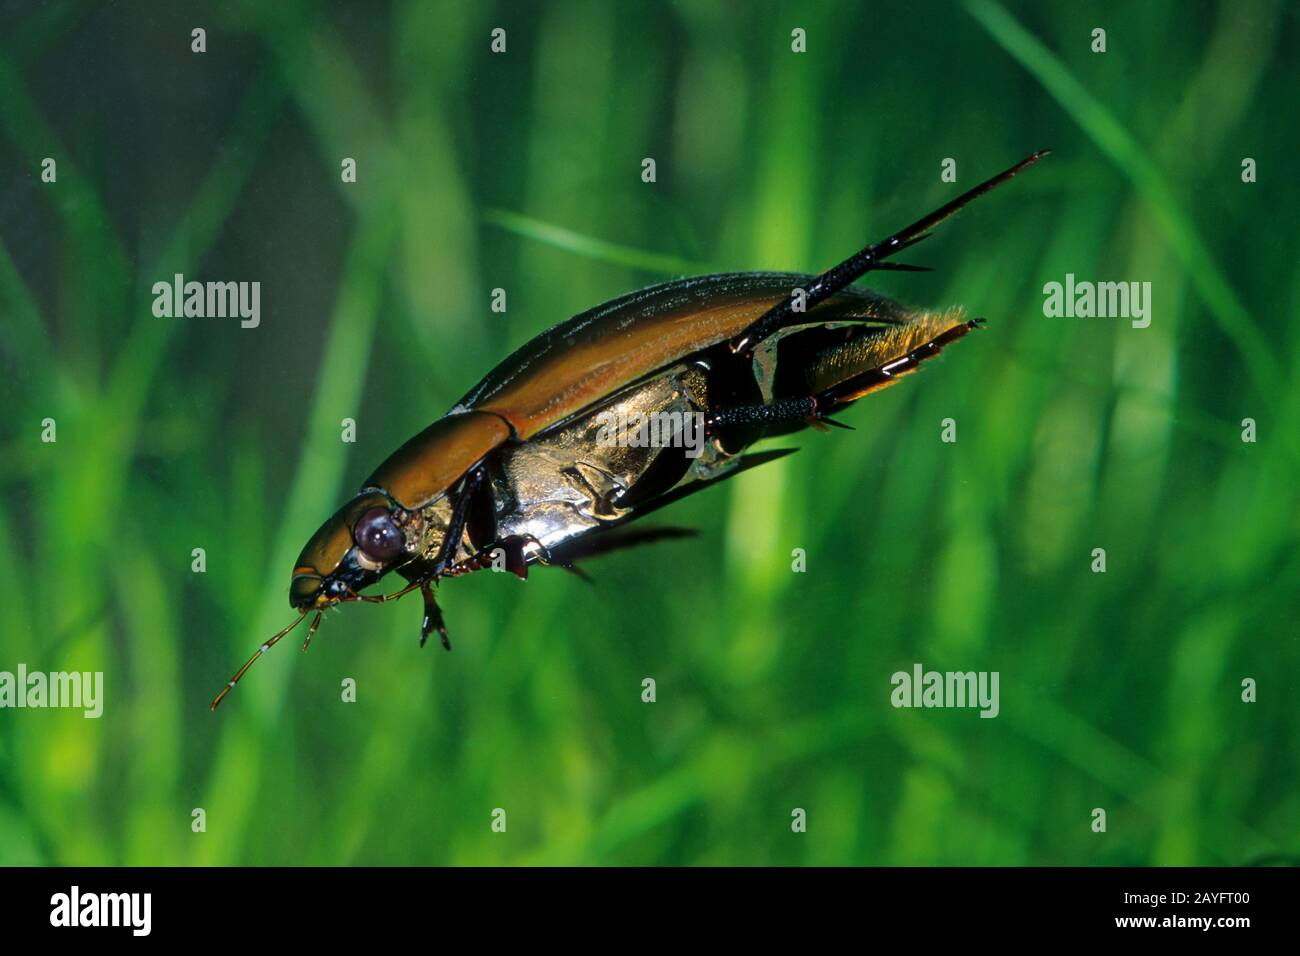 Greater silver beetle, Great black water beetle, Great silver water beetle, Diving water beetle (Hydrophilus piceus, Hydrous piceus), swimming, Germany Stock Photo